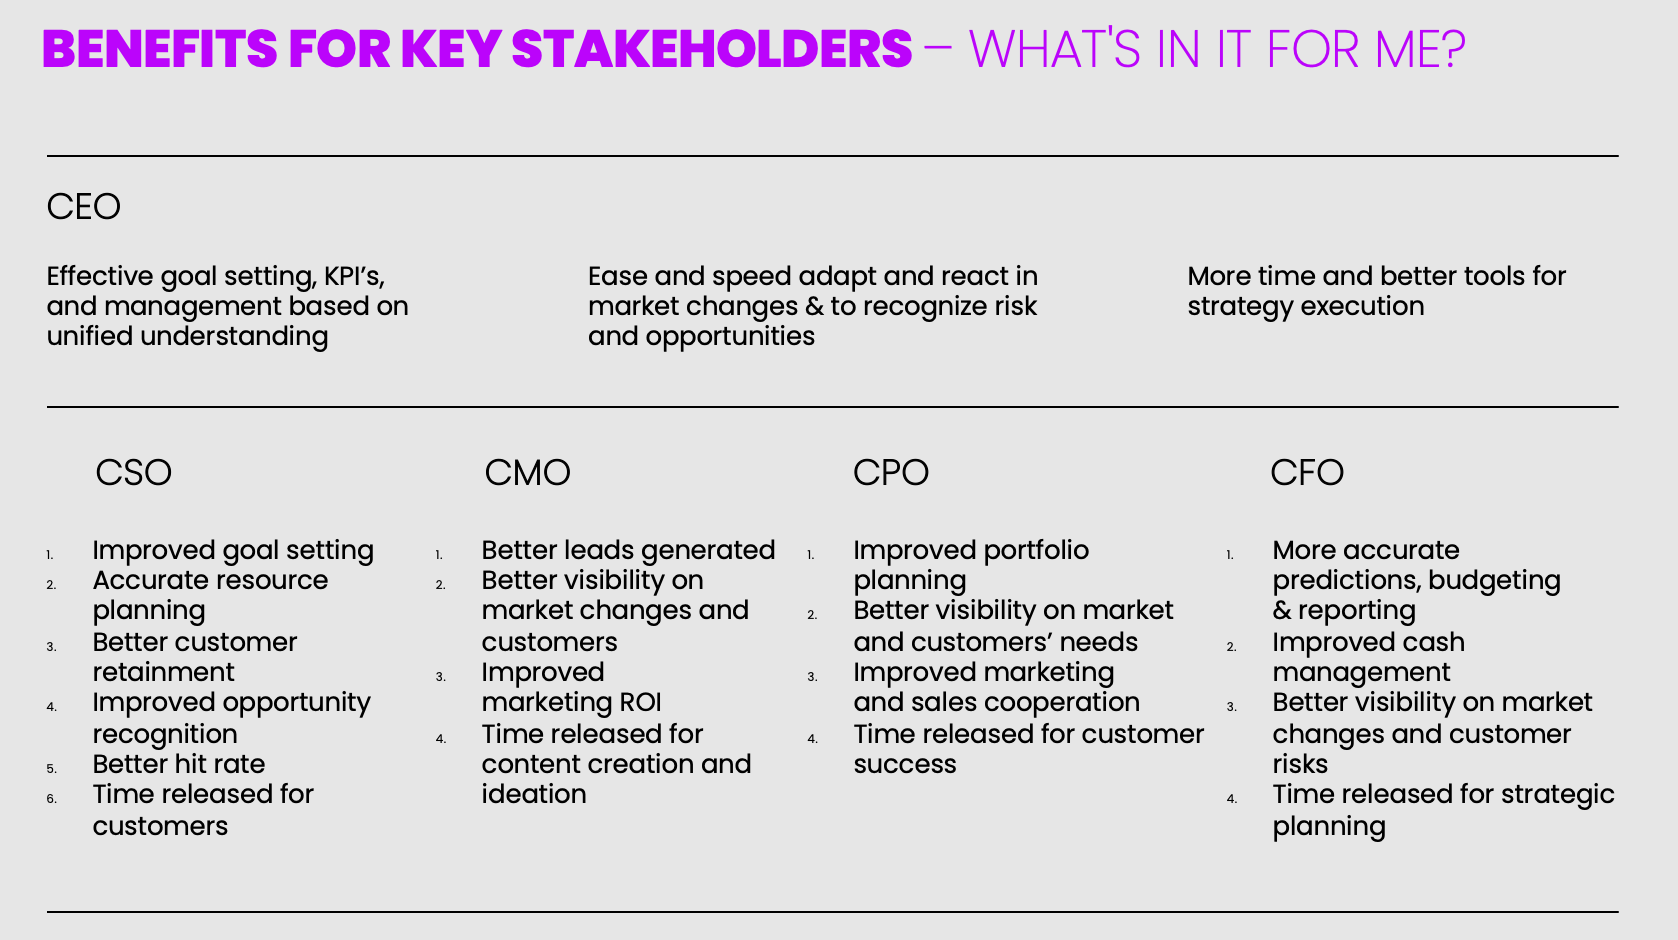 What benefits and value different stakeholder at C-level gain from 180ops tools?